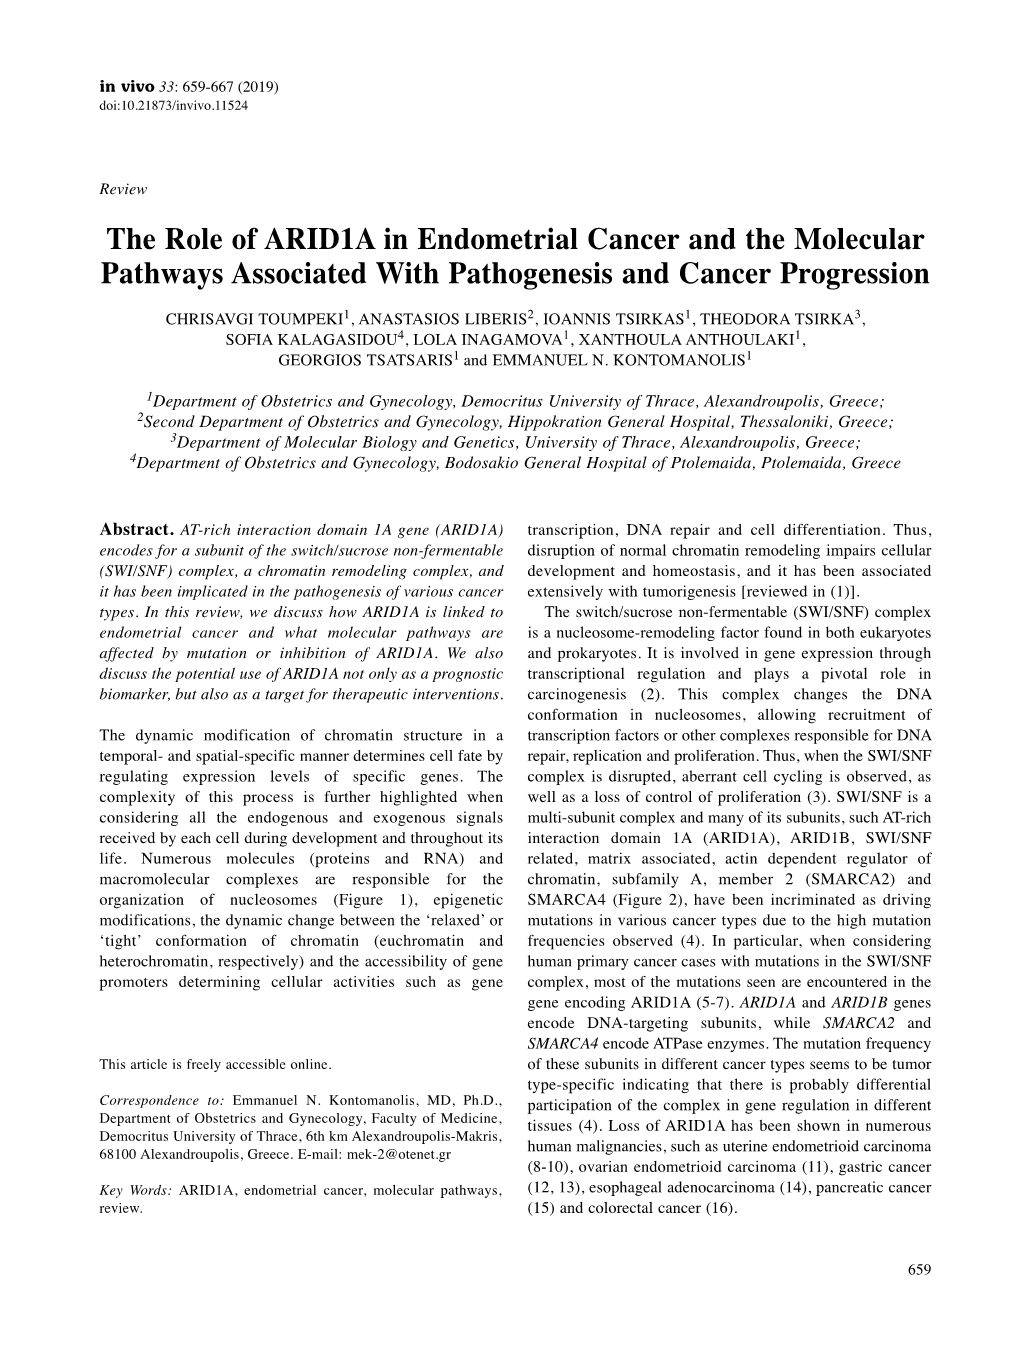 The Role of ARID1A in Endometrial Cancer and the Molecular